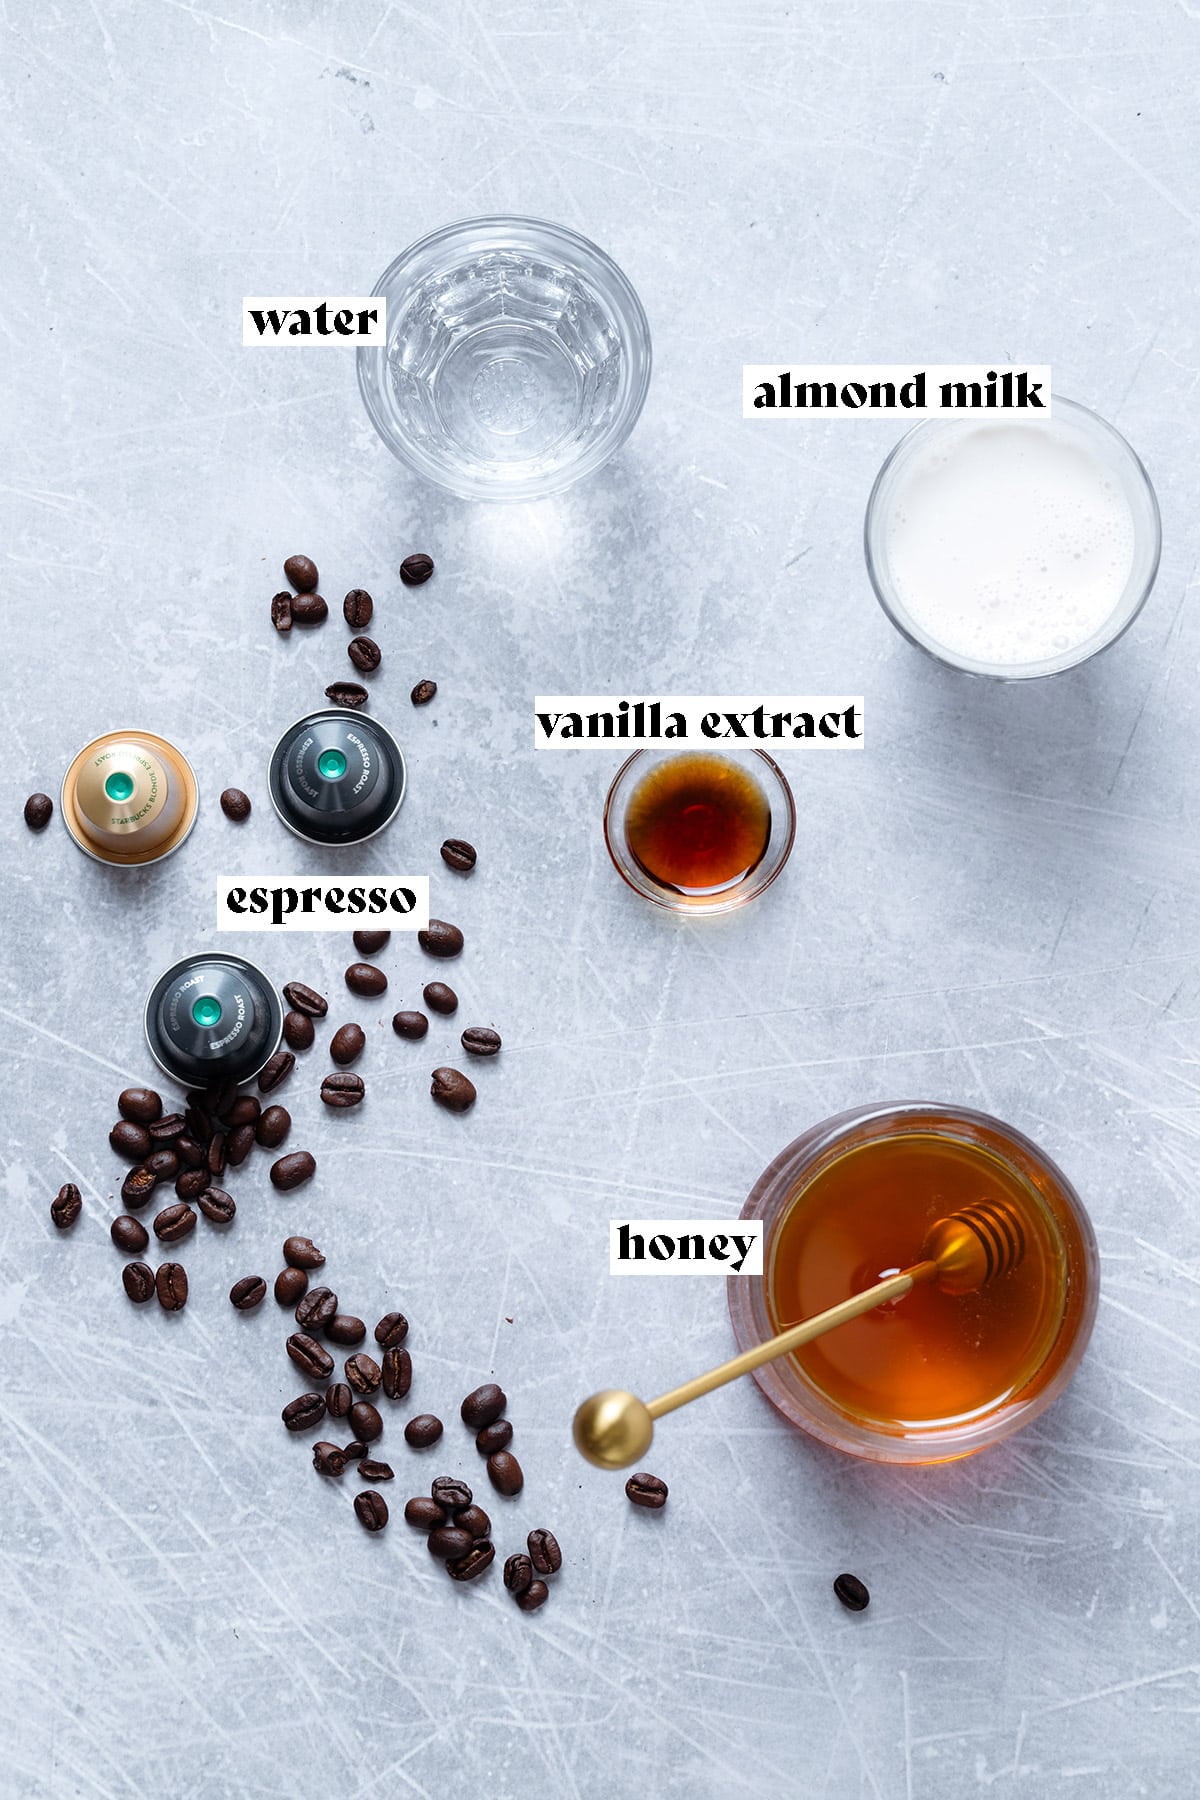 Ingredients for honey flat white like honey, espresso, and milk all laid out on a grey background.